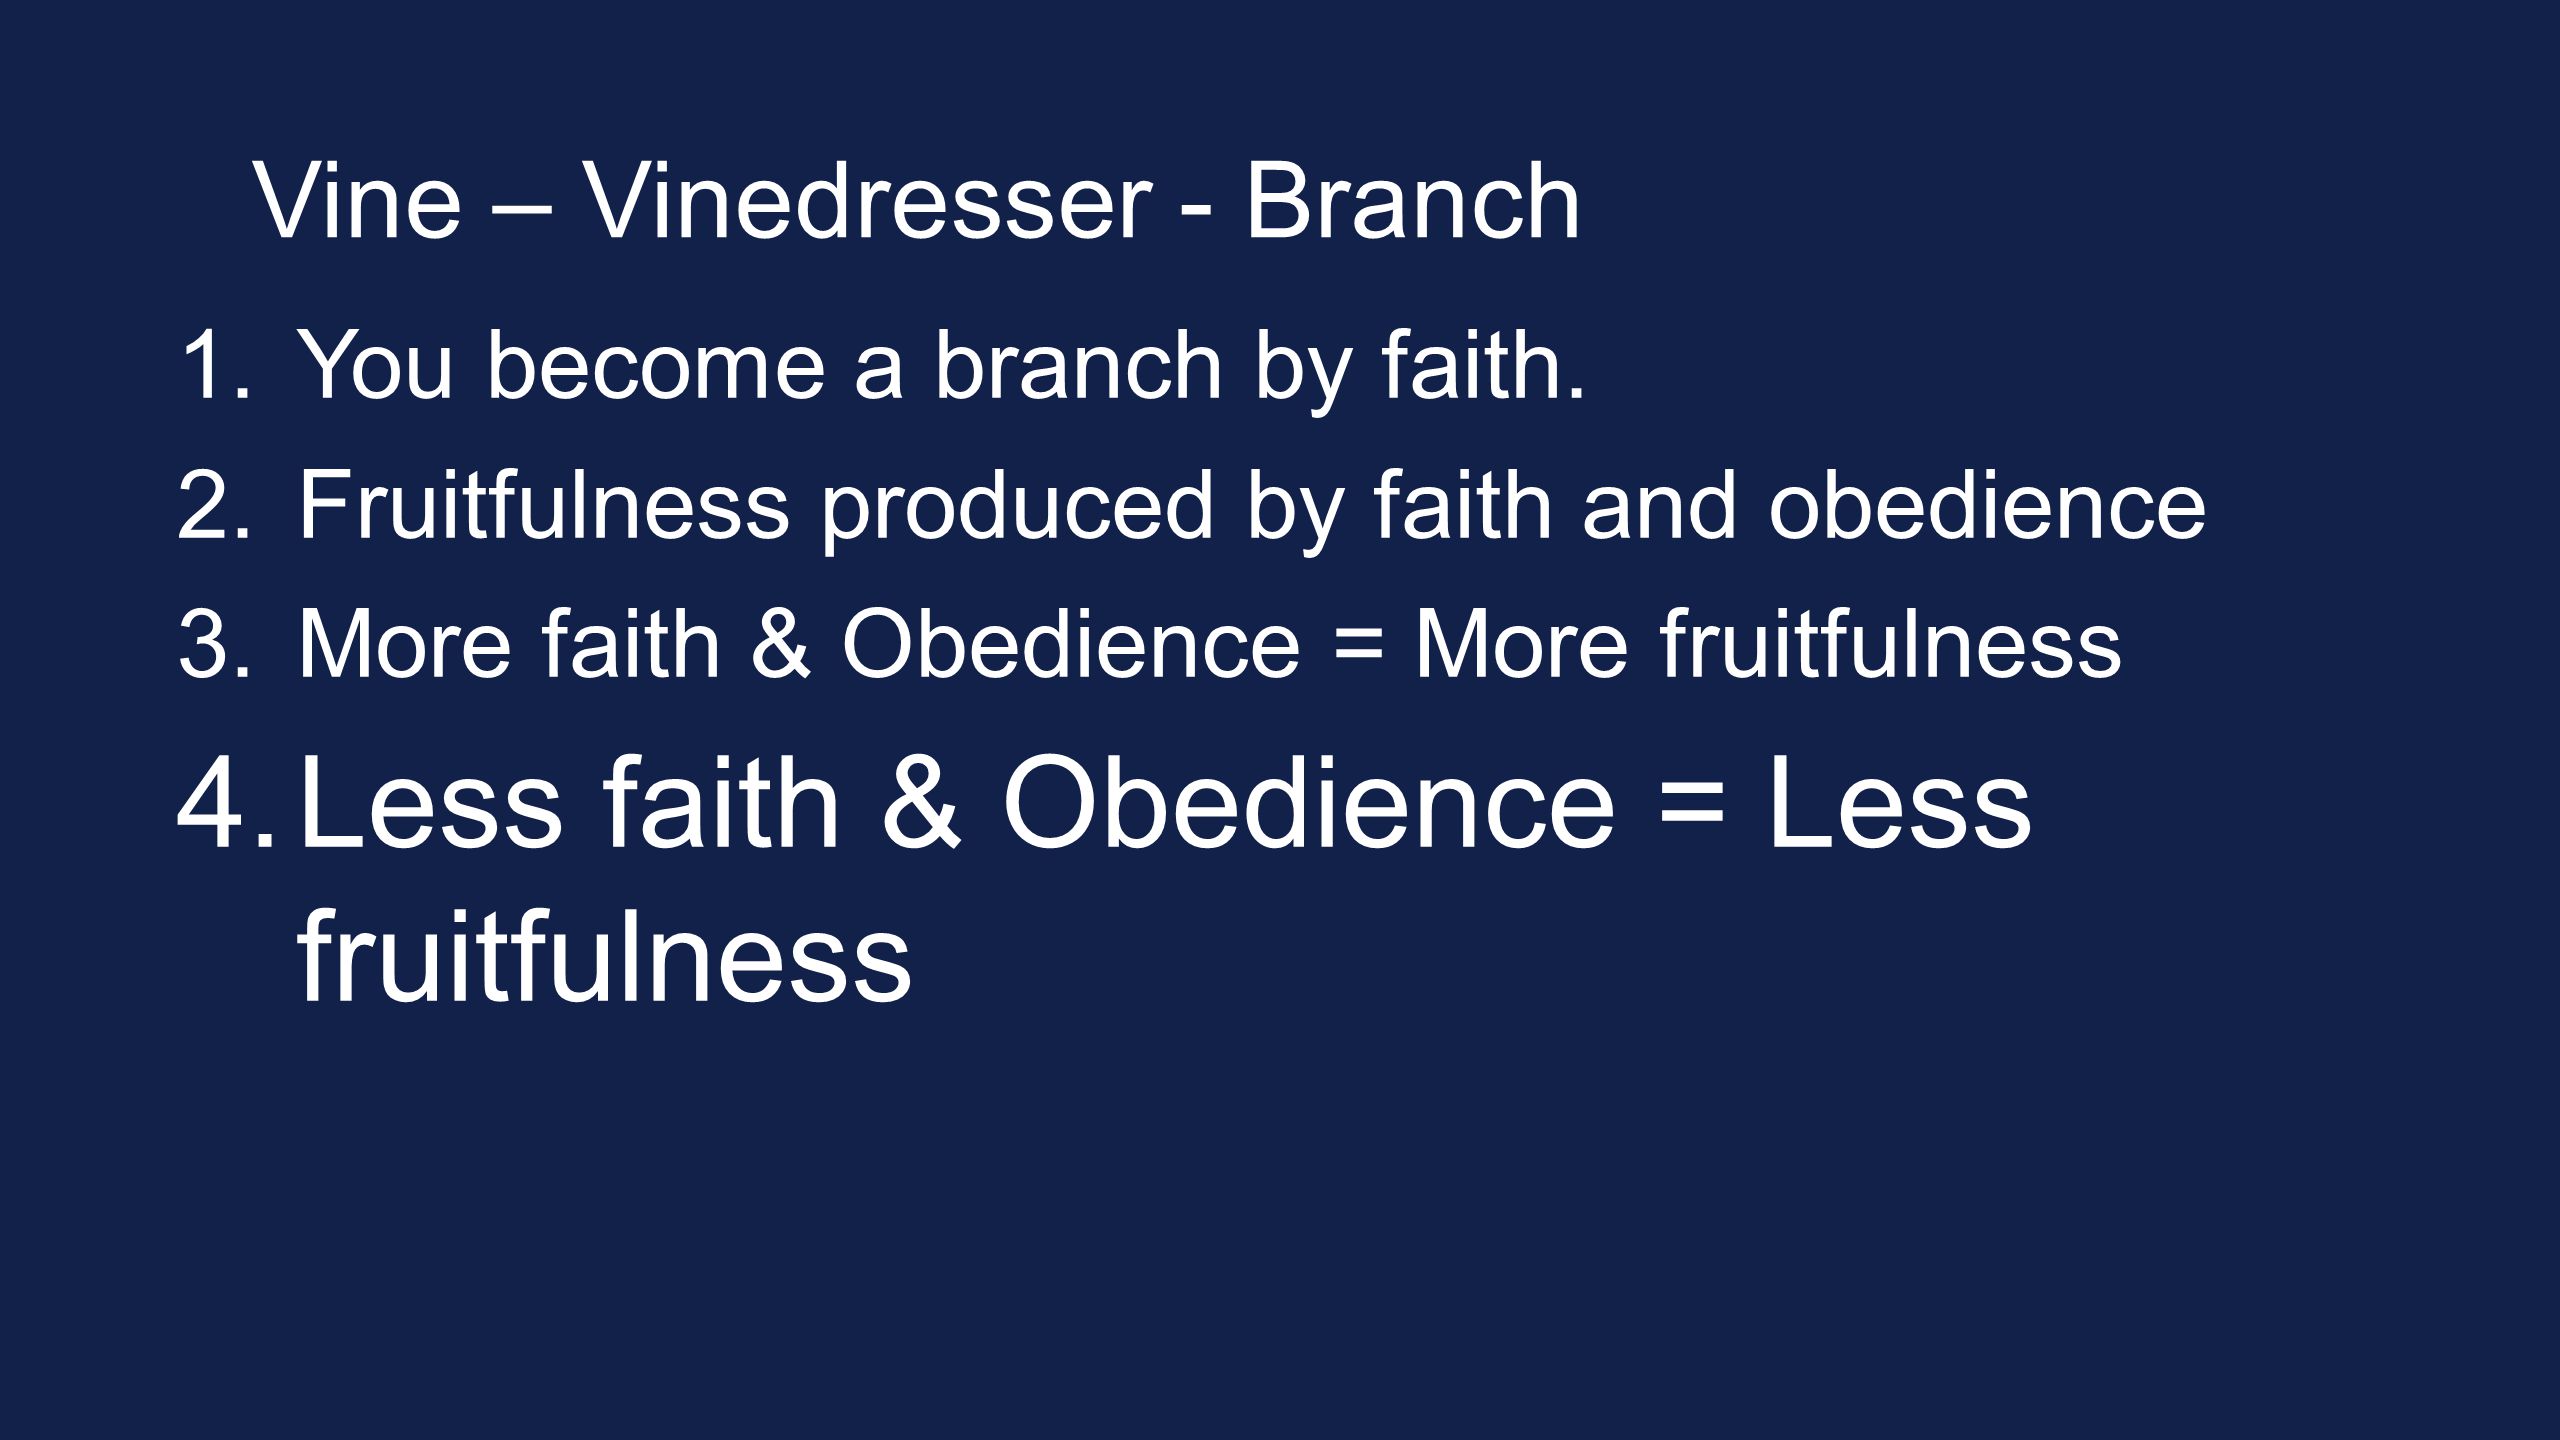 Vine – Vinedresser - Branch 1.You become a branch by faith.